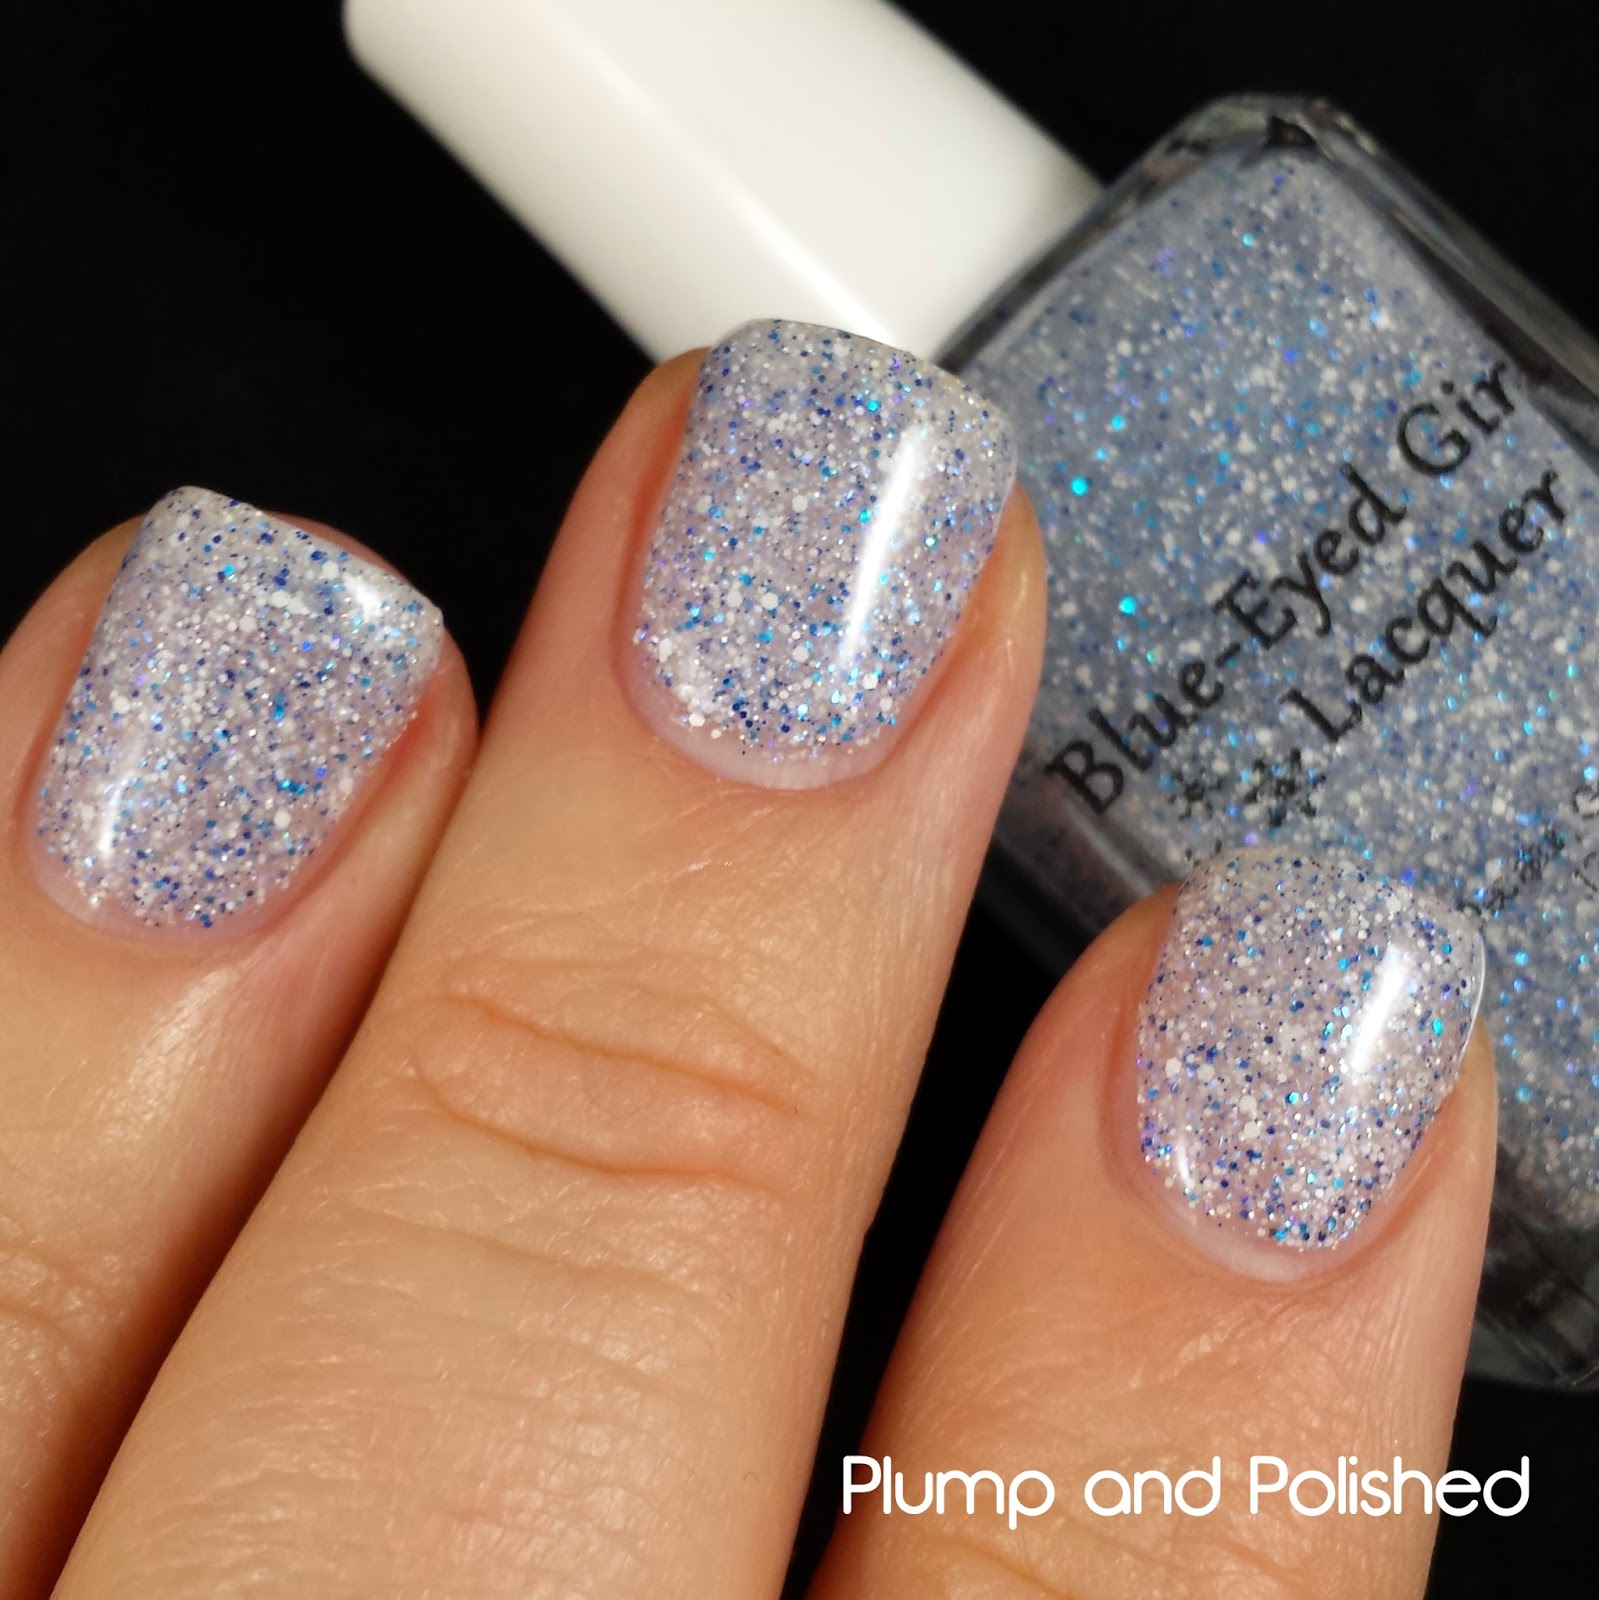 Blue-Eyed Girl Lacquer - The Years Have Been Short